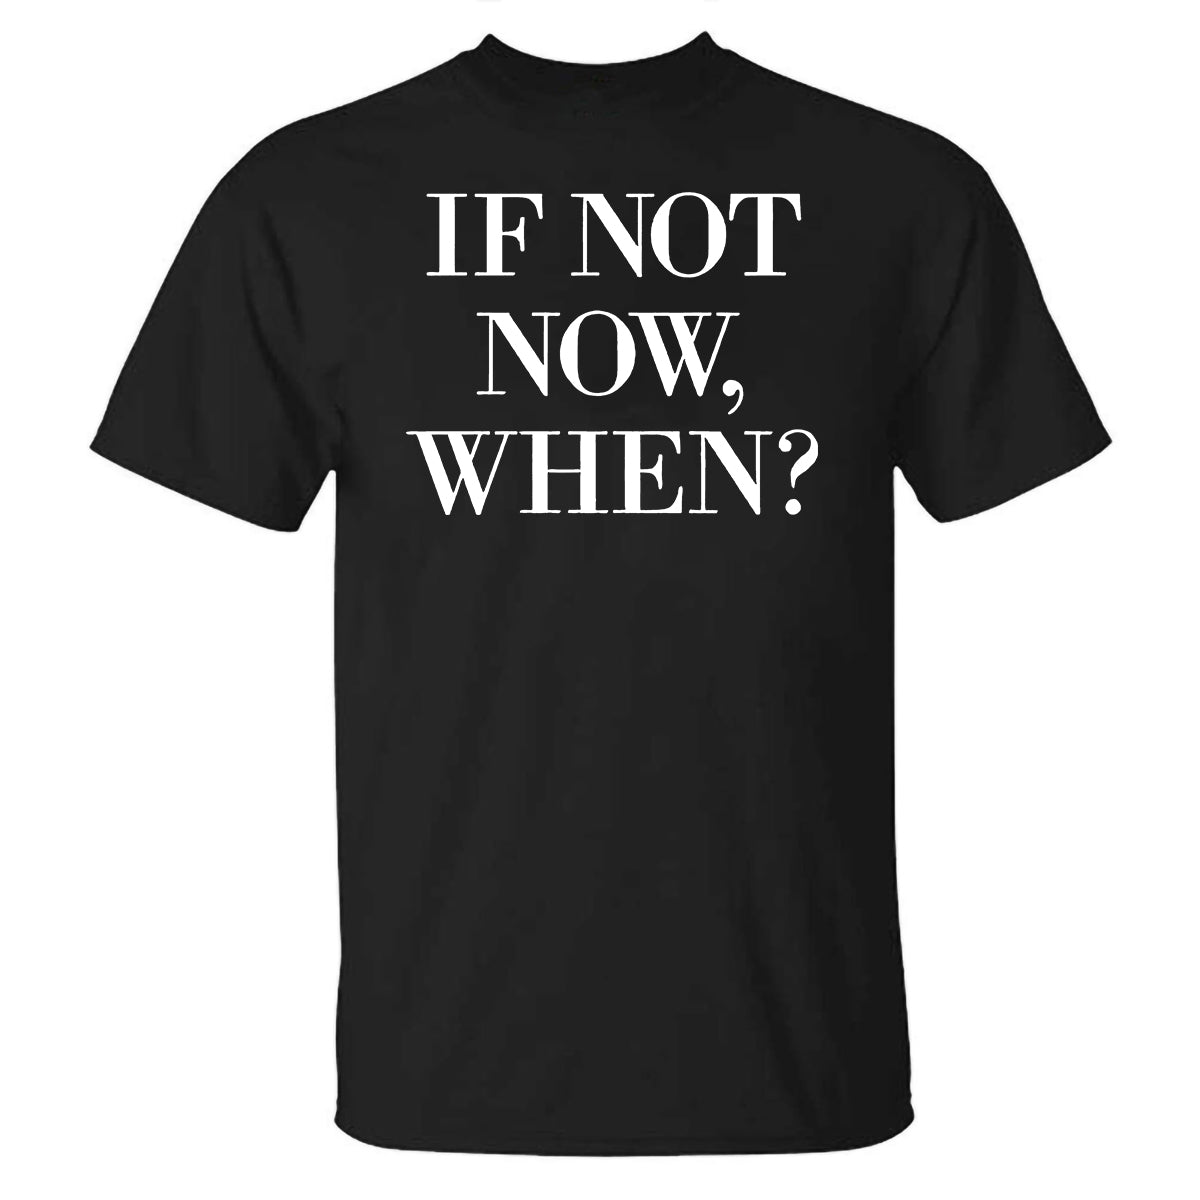 If Not Now, When? Printed T-shirt